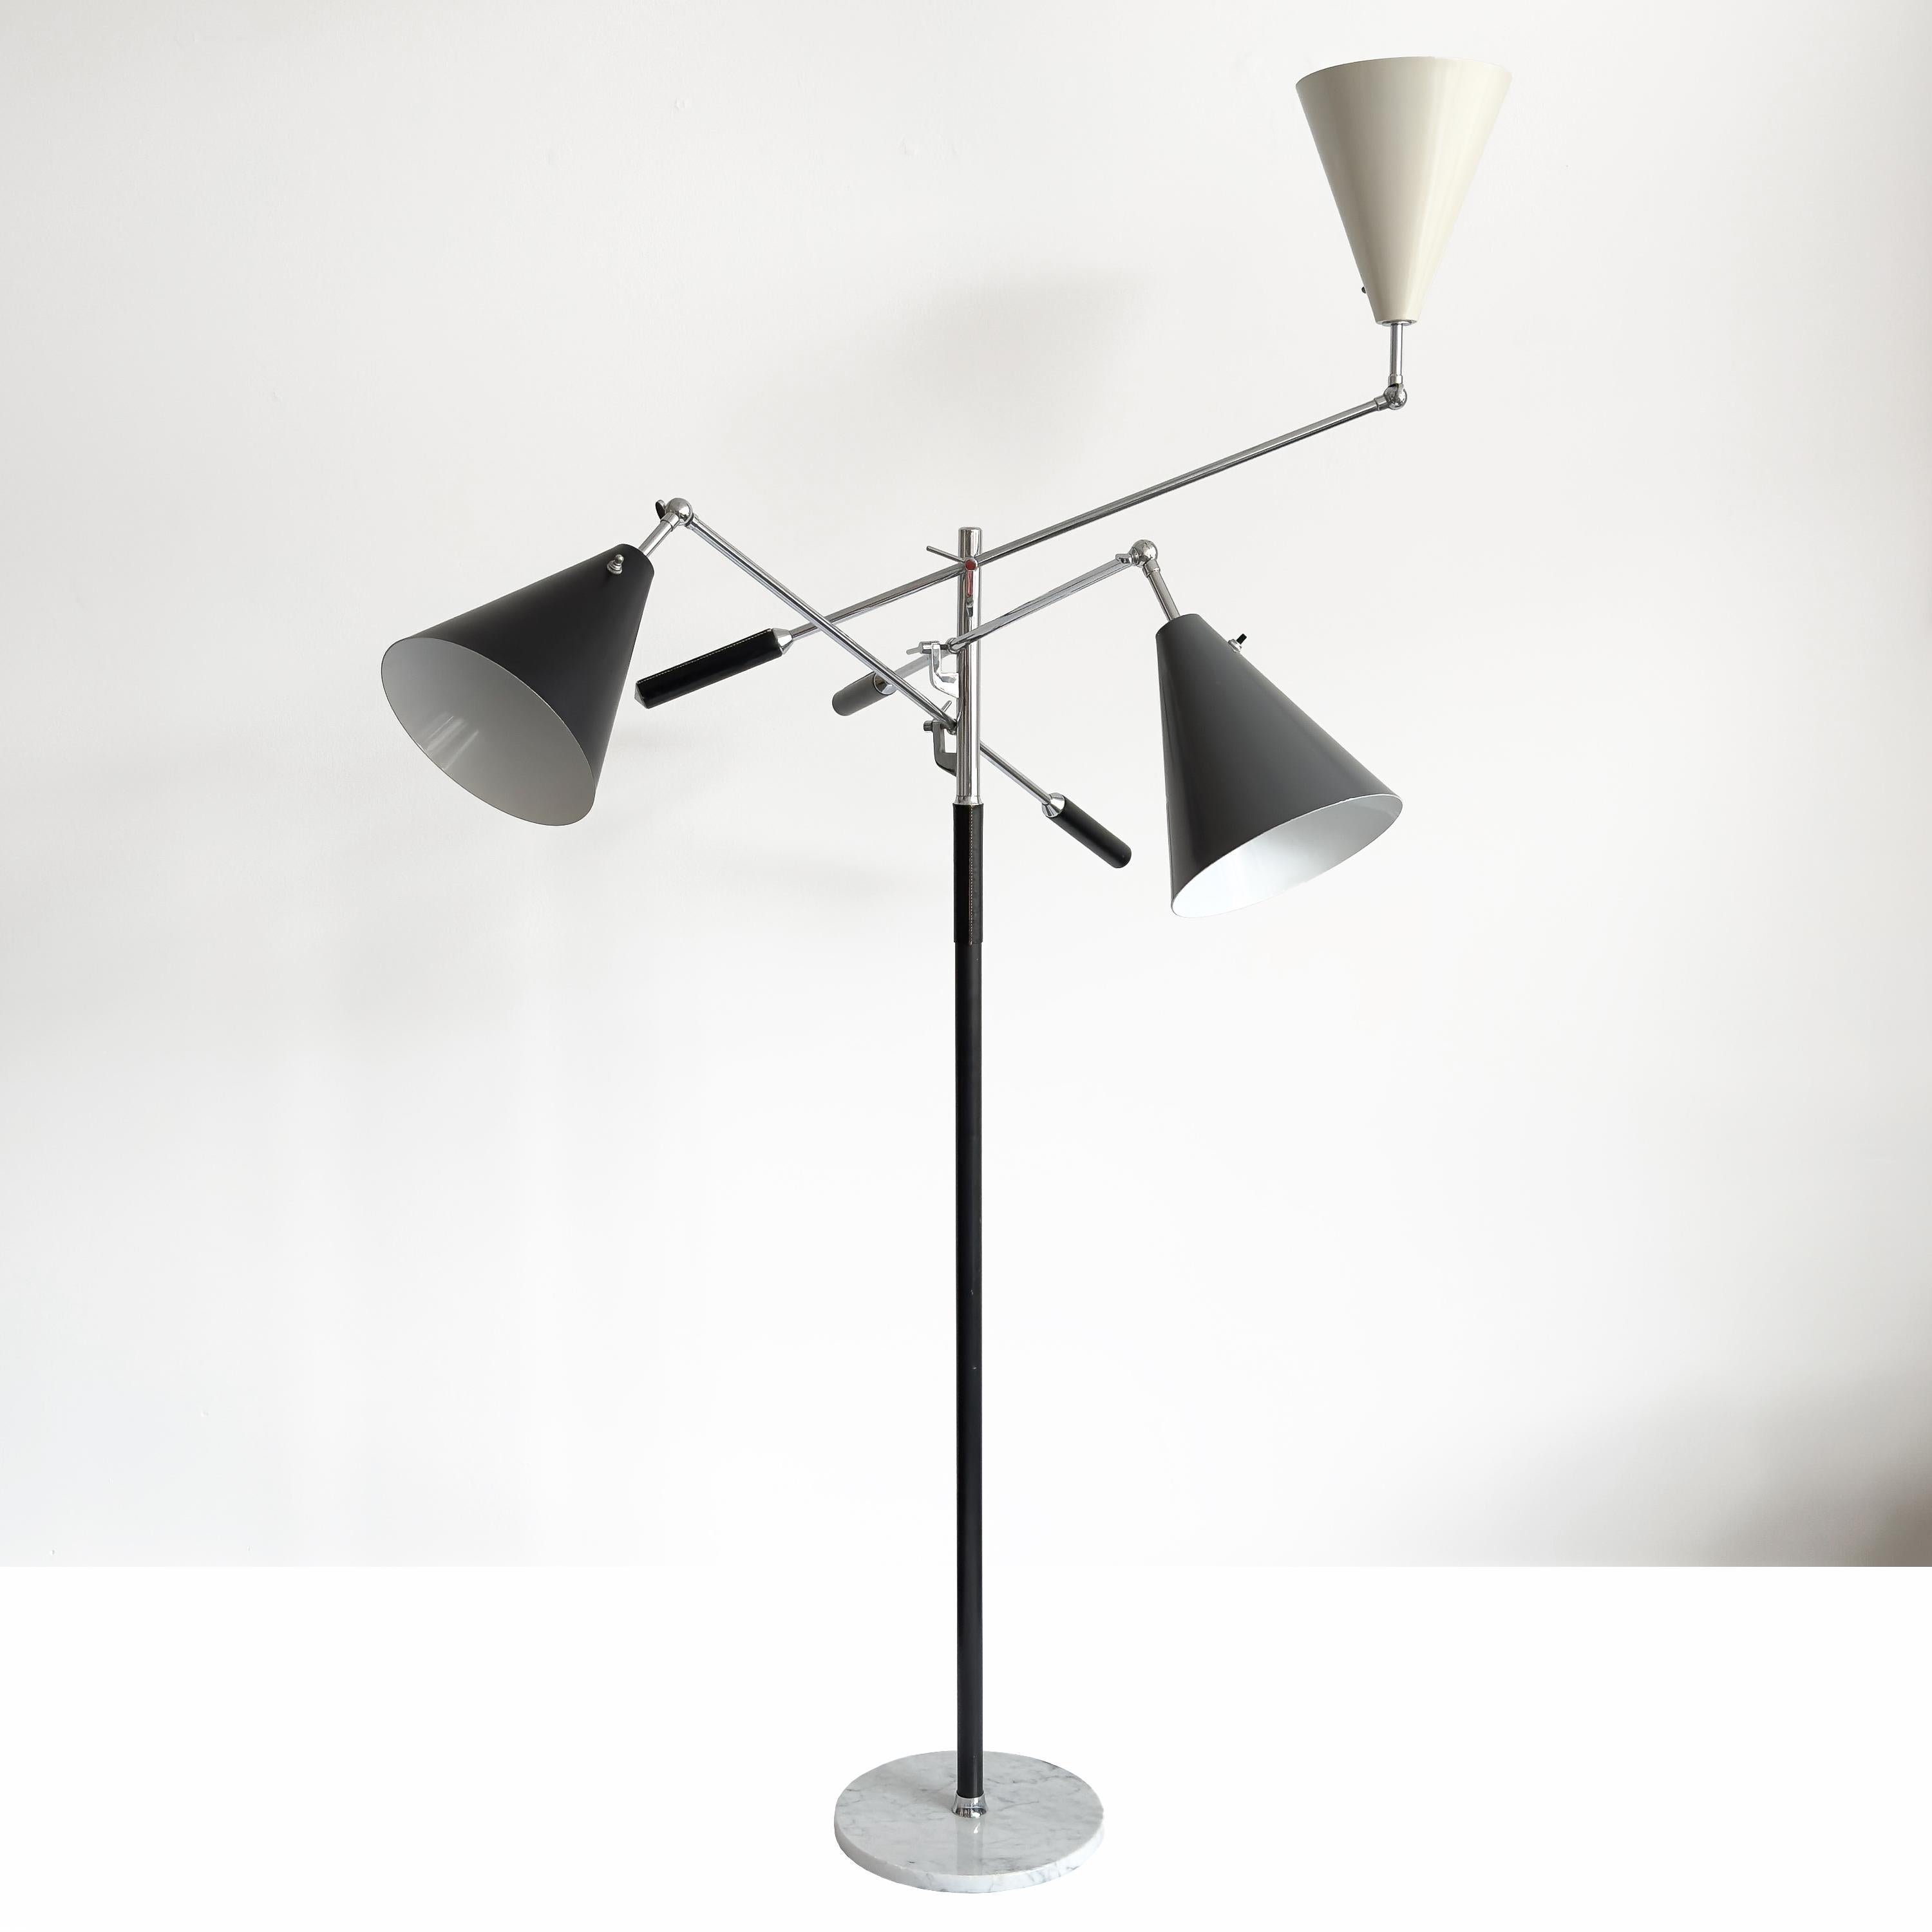 Illuminate your space with the iconic 1951 Triennale award-winning three-arm floor lamp by Angelo Lelii, a masterpiece of Italian design, this model was produced in Italy for export by Denis Casey for Casey Fantin, Florence, and imported to the USA